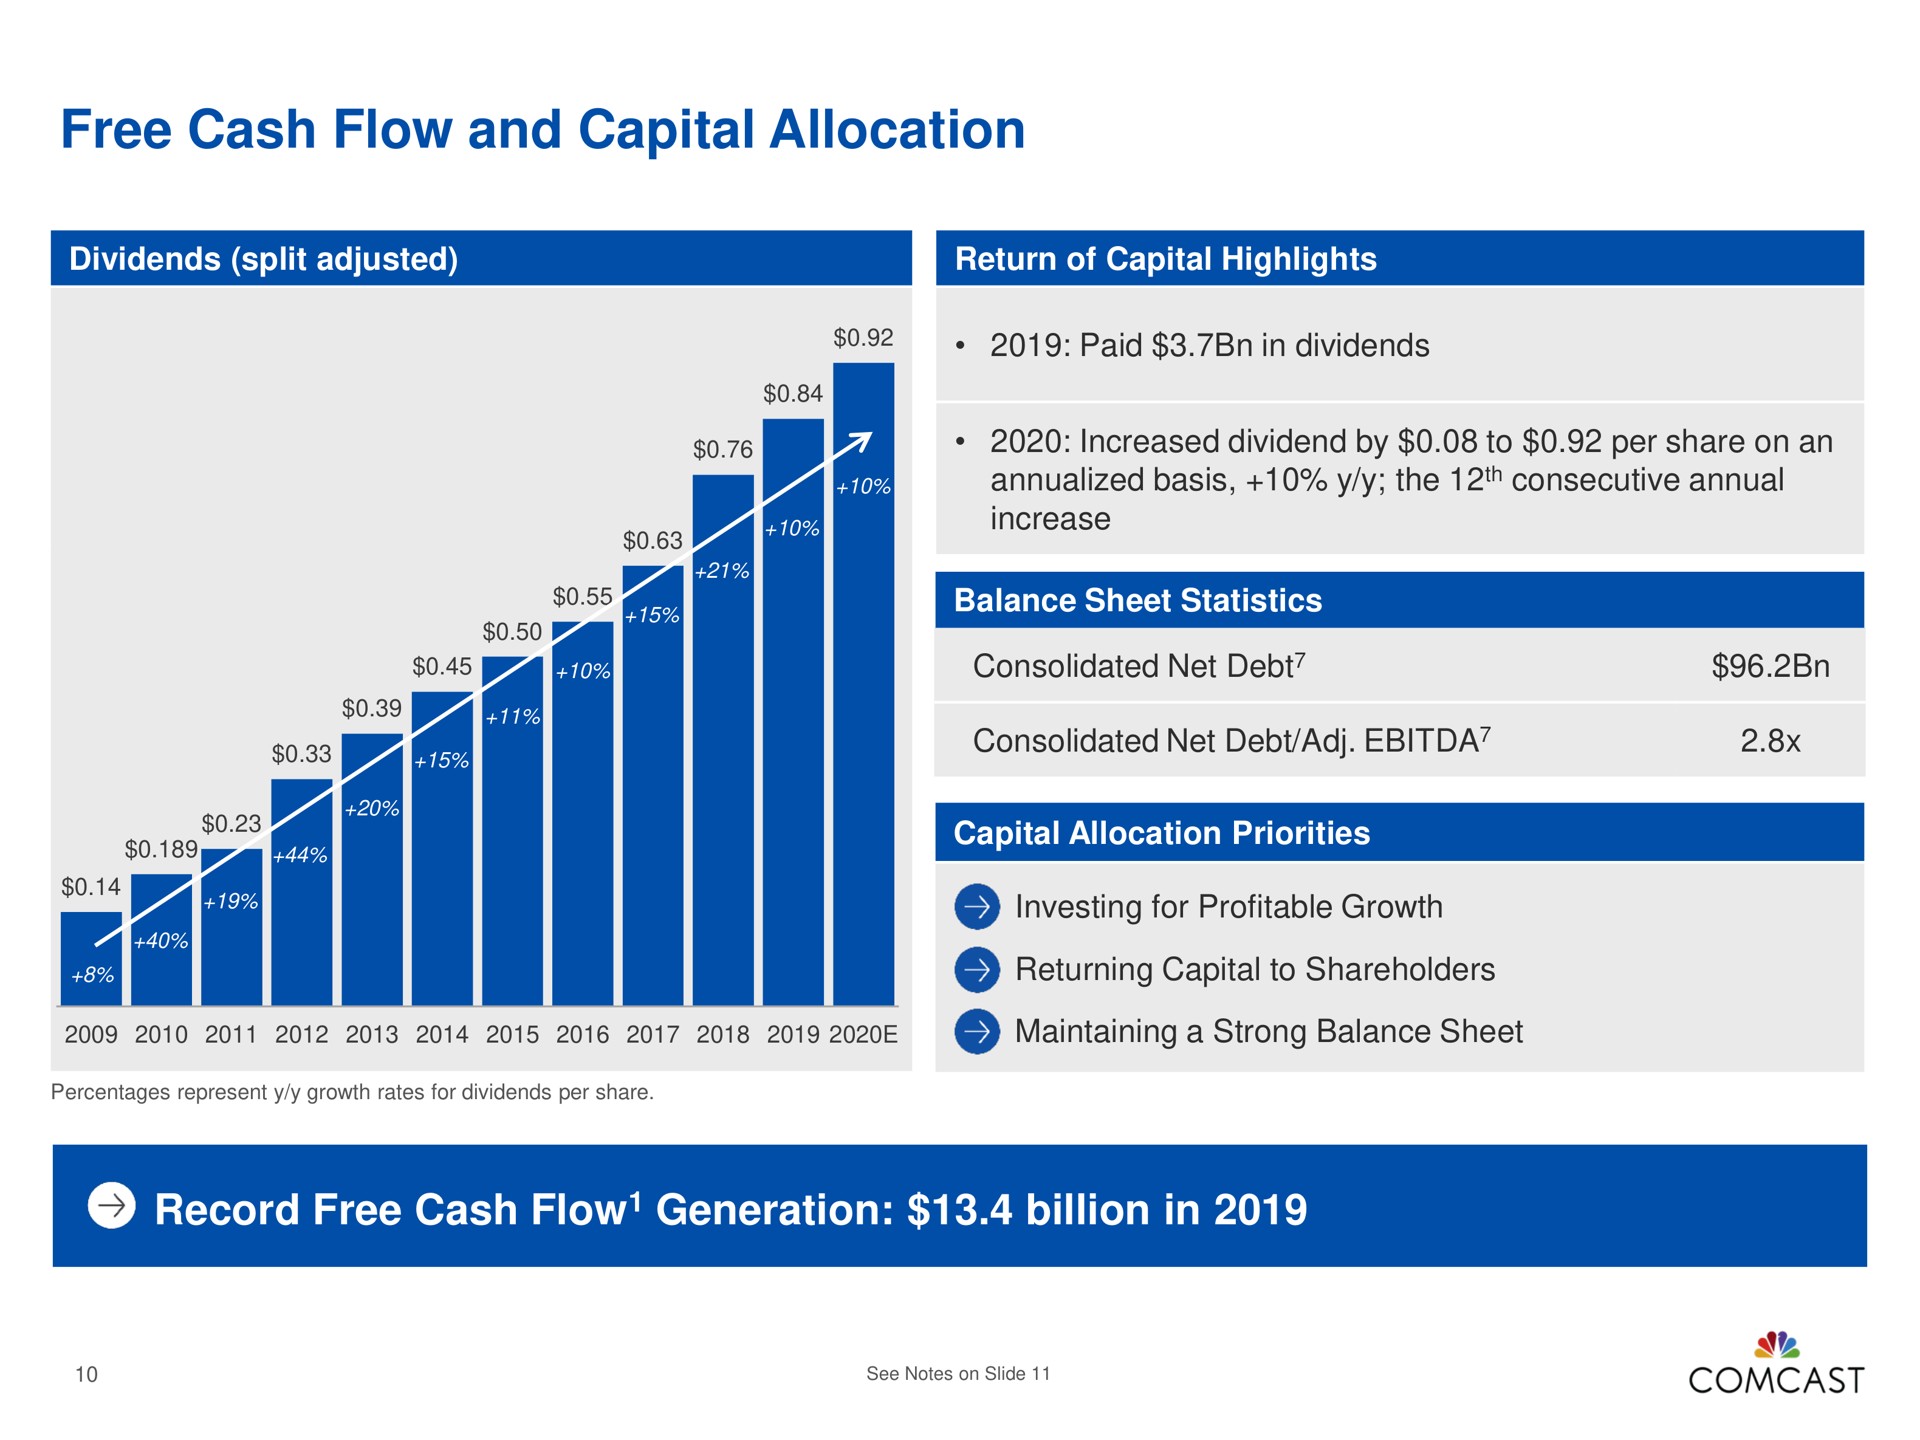 free cash flow and capital allocation record free cash flow generation billion in a | Comcast